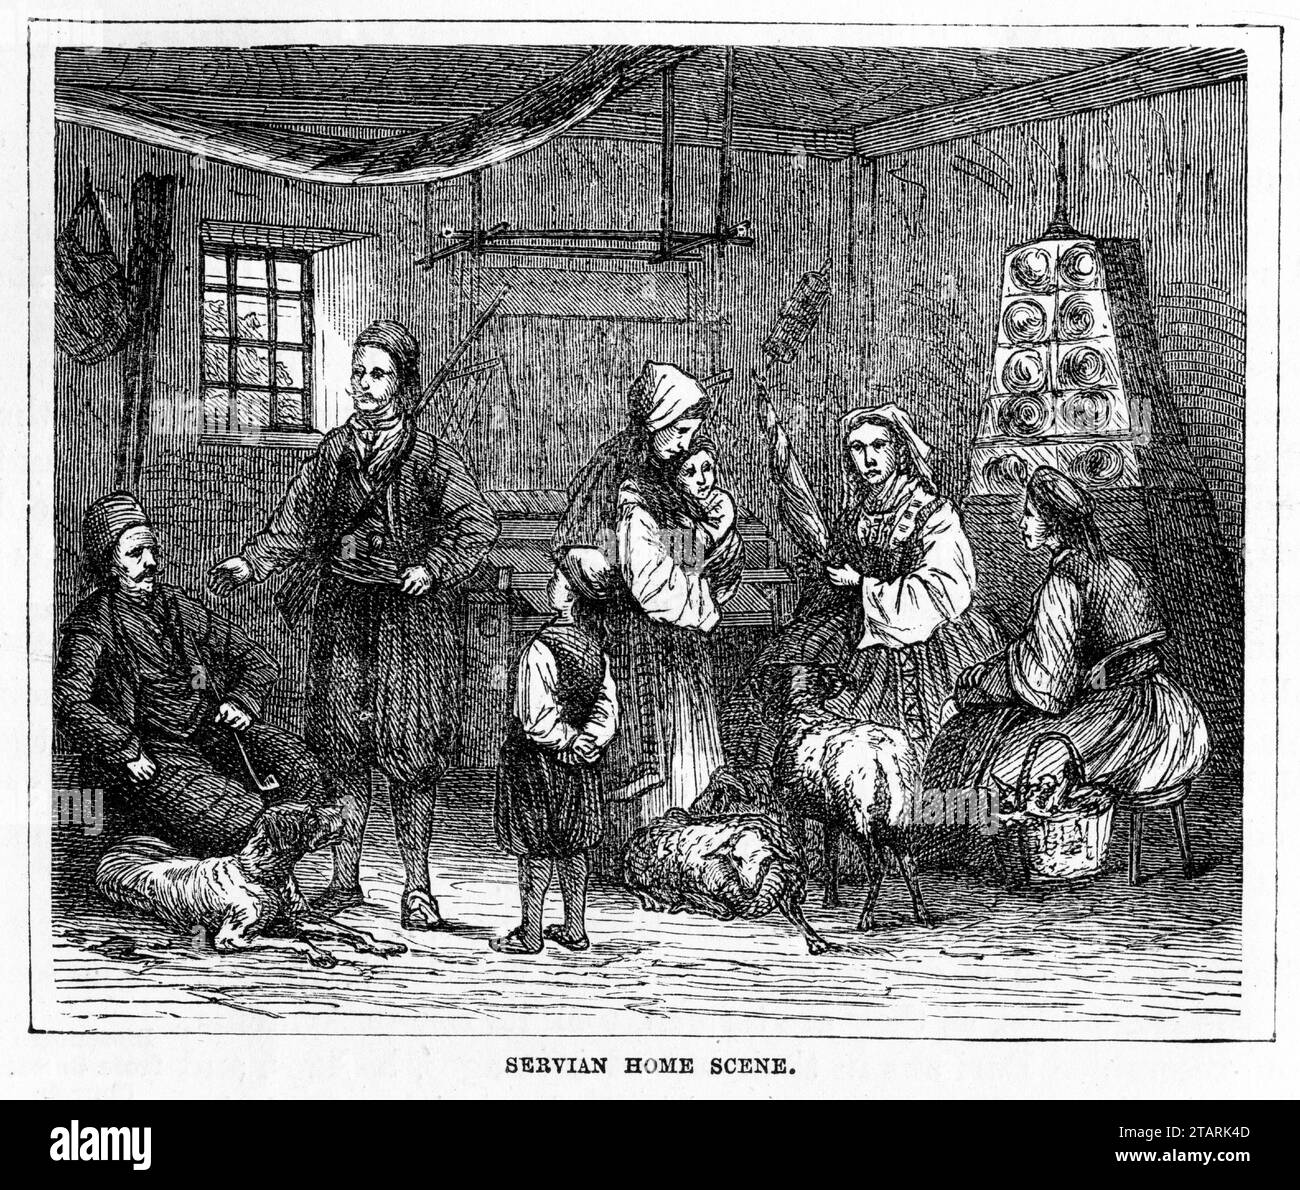 Engraved portrait of Servian home scene with people in traditional costumes. Published circa 1887 Stock Photo